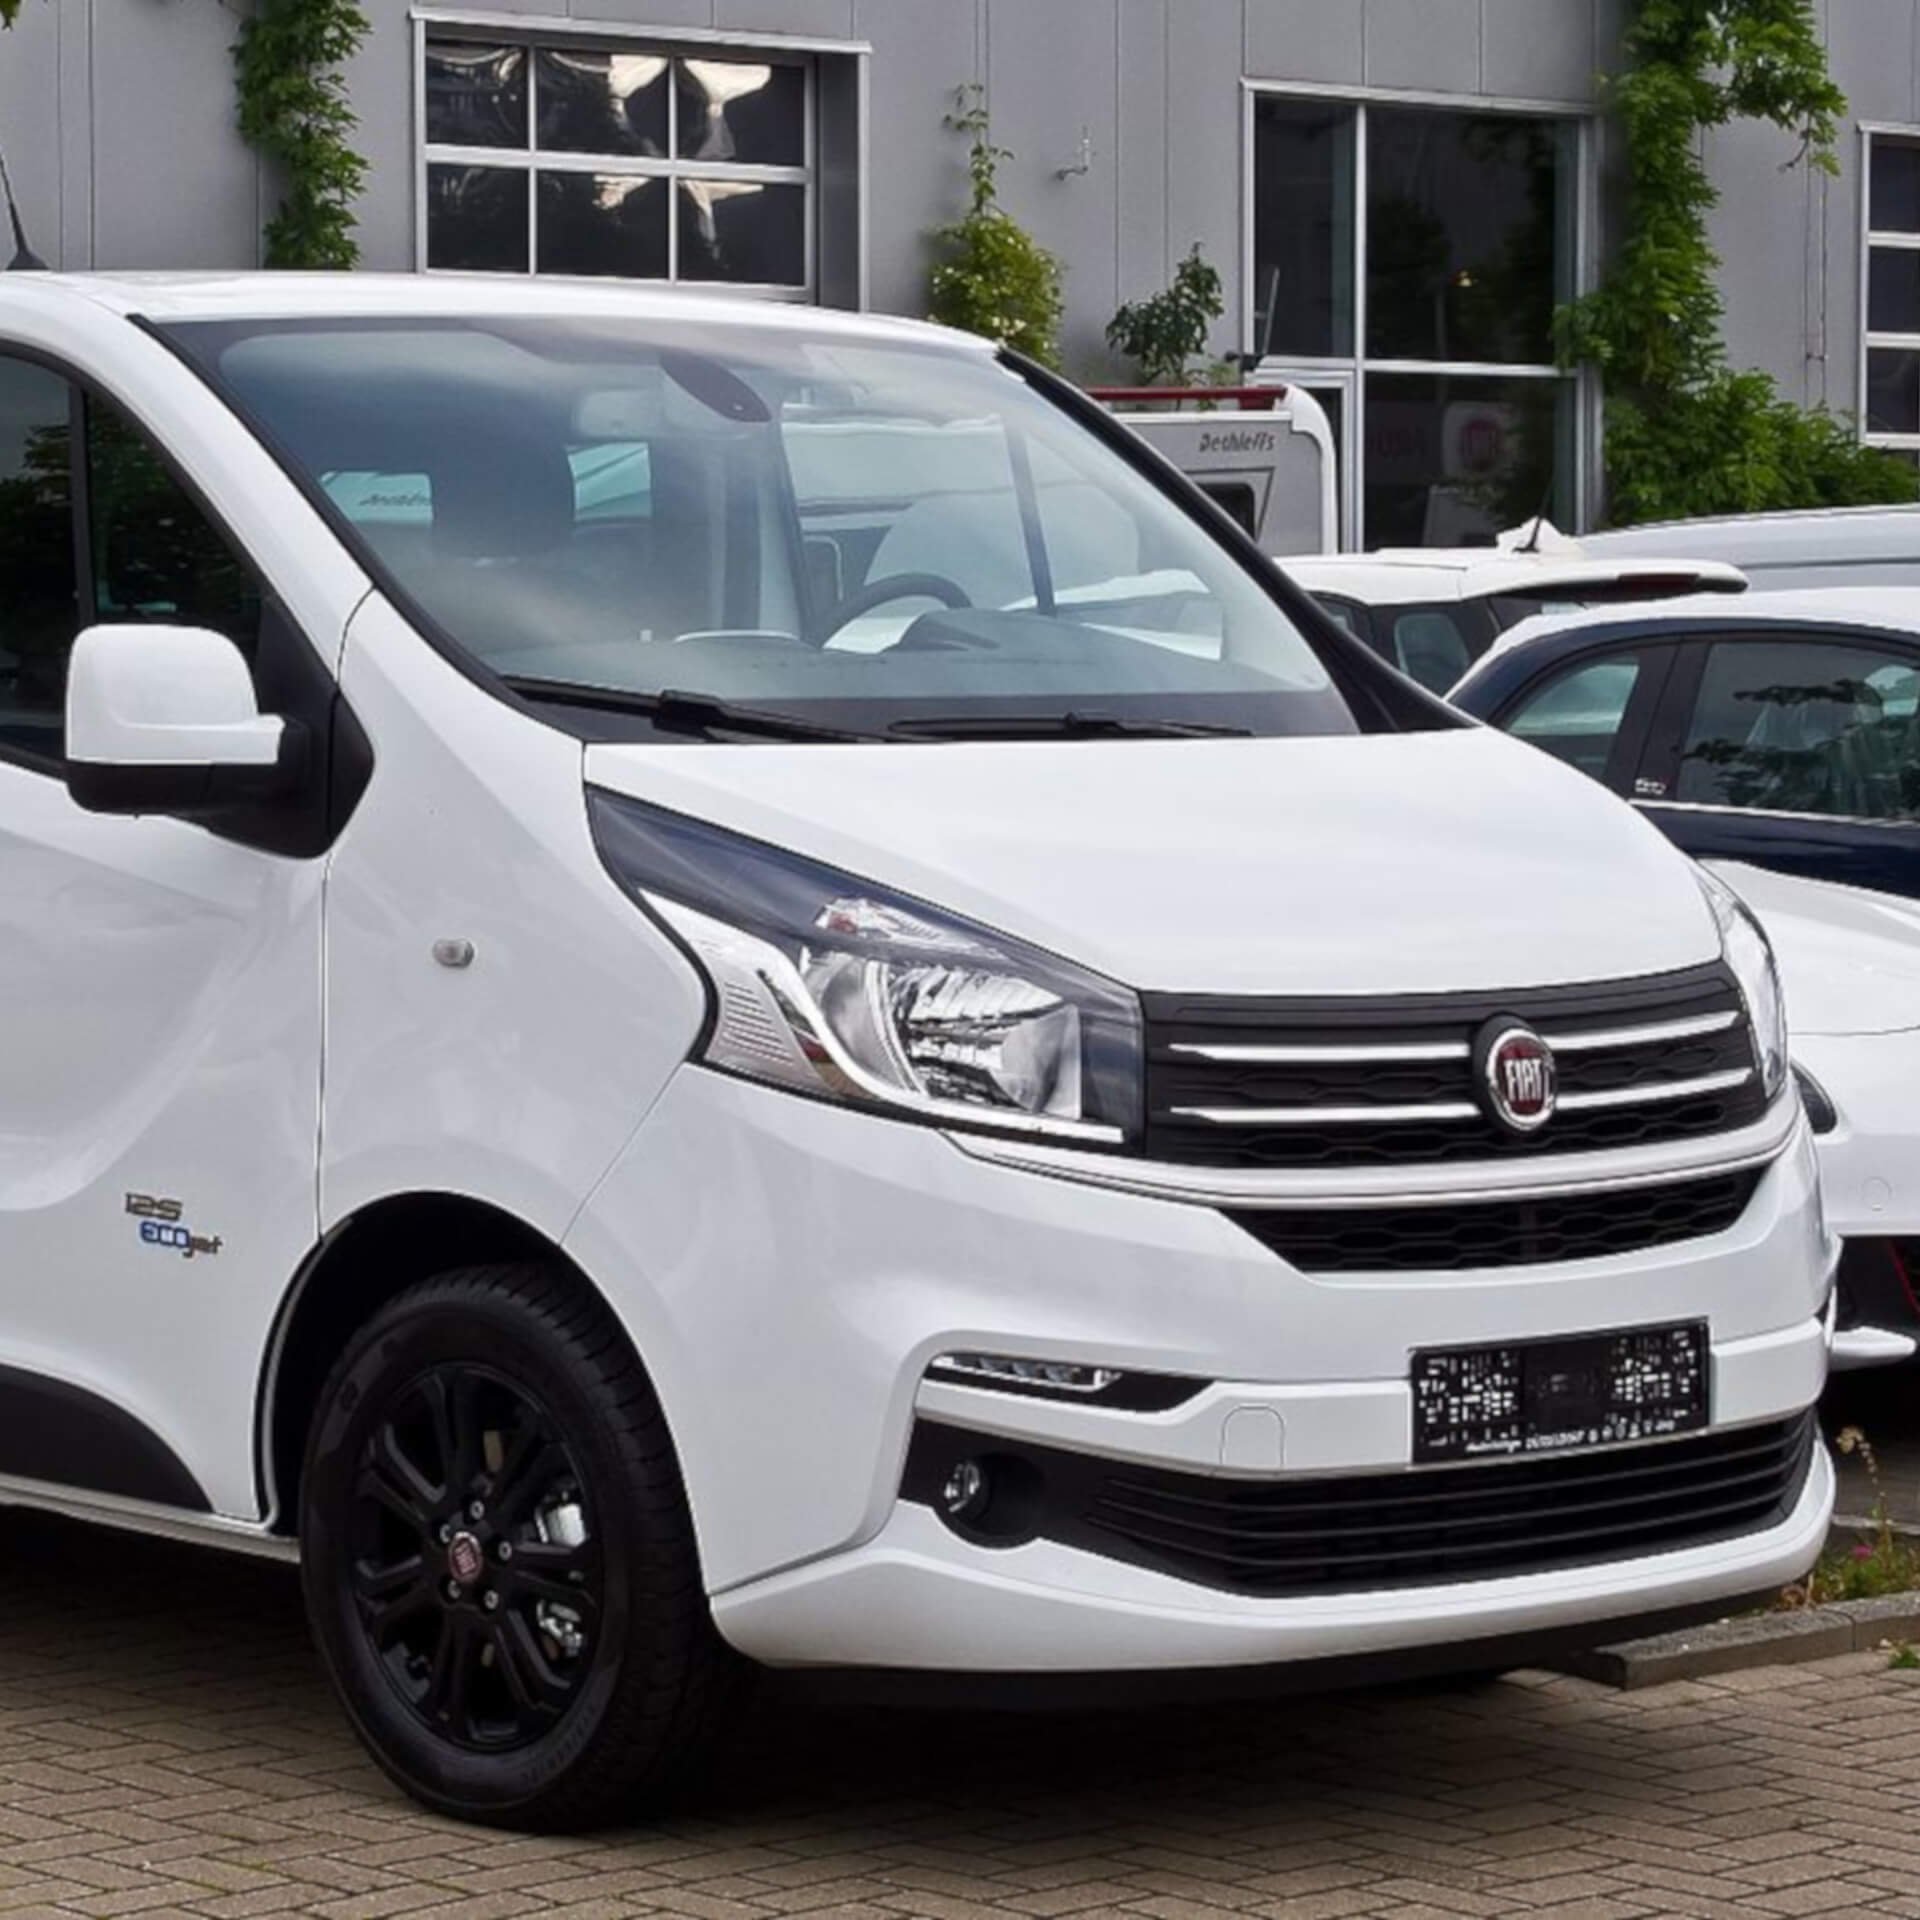 Direct4x4 accessories for Fiat Talento vehicles with a photo of a white Fiat Talento parked in a car park